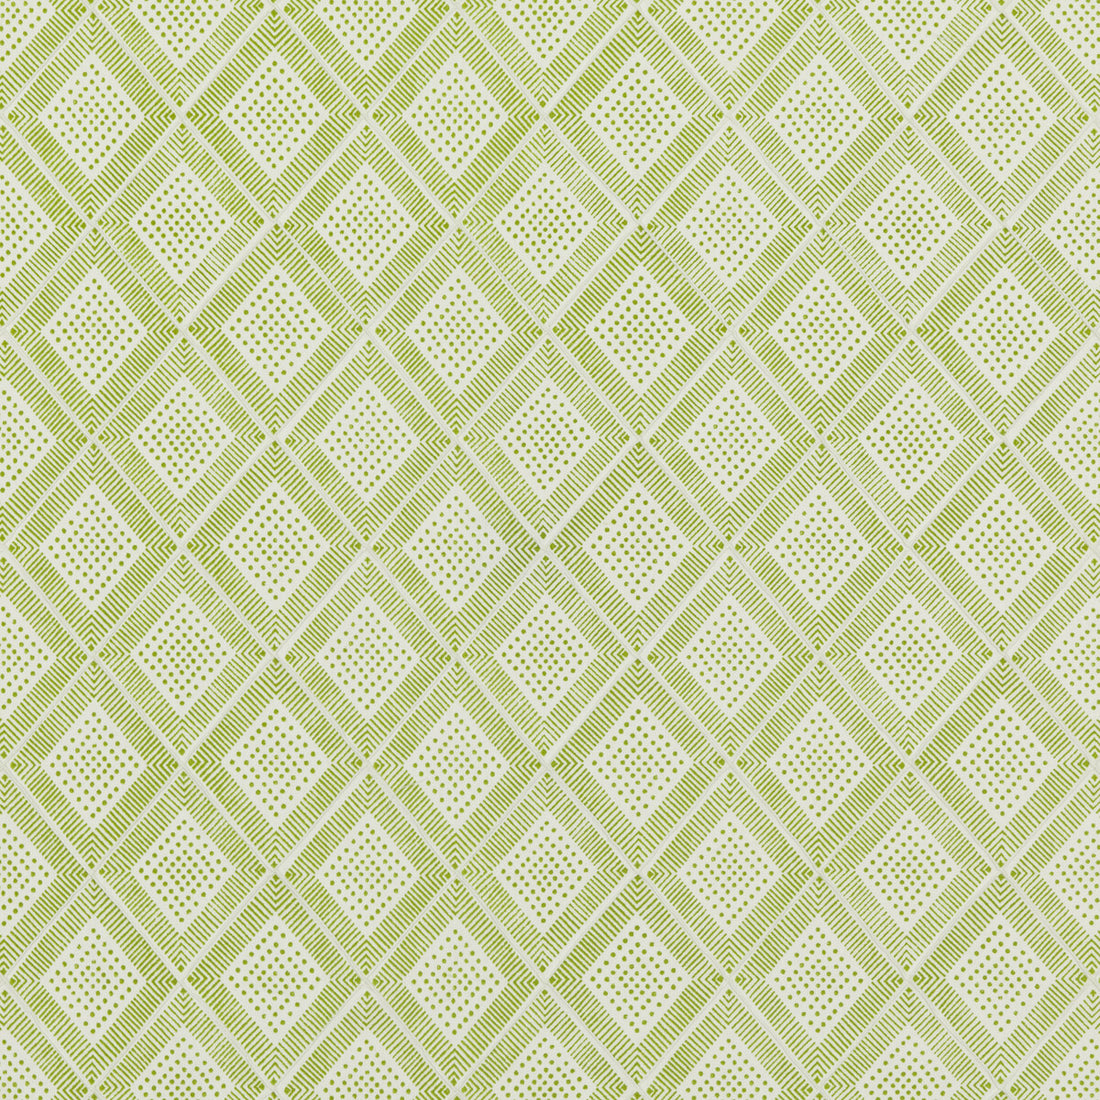 Block Trellis fabric in green color - pattern PP50484.5.0 - by Baker Lifestyle in the Block Party collection